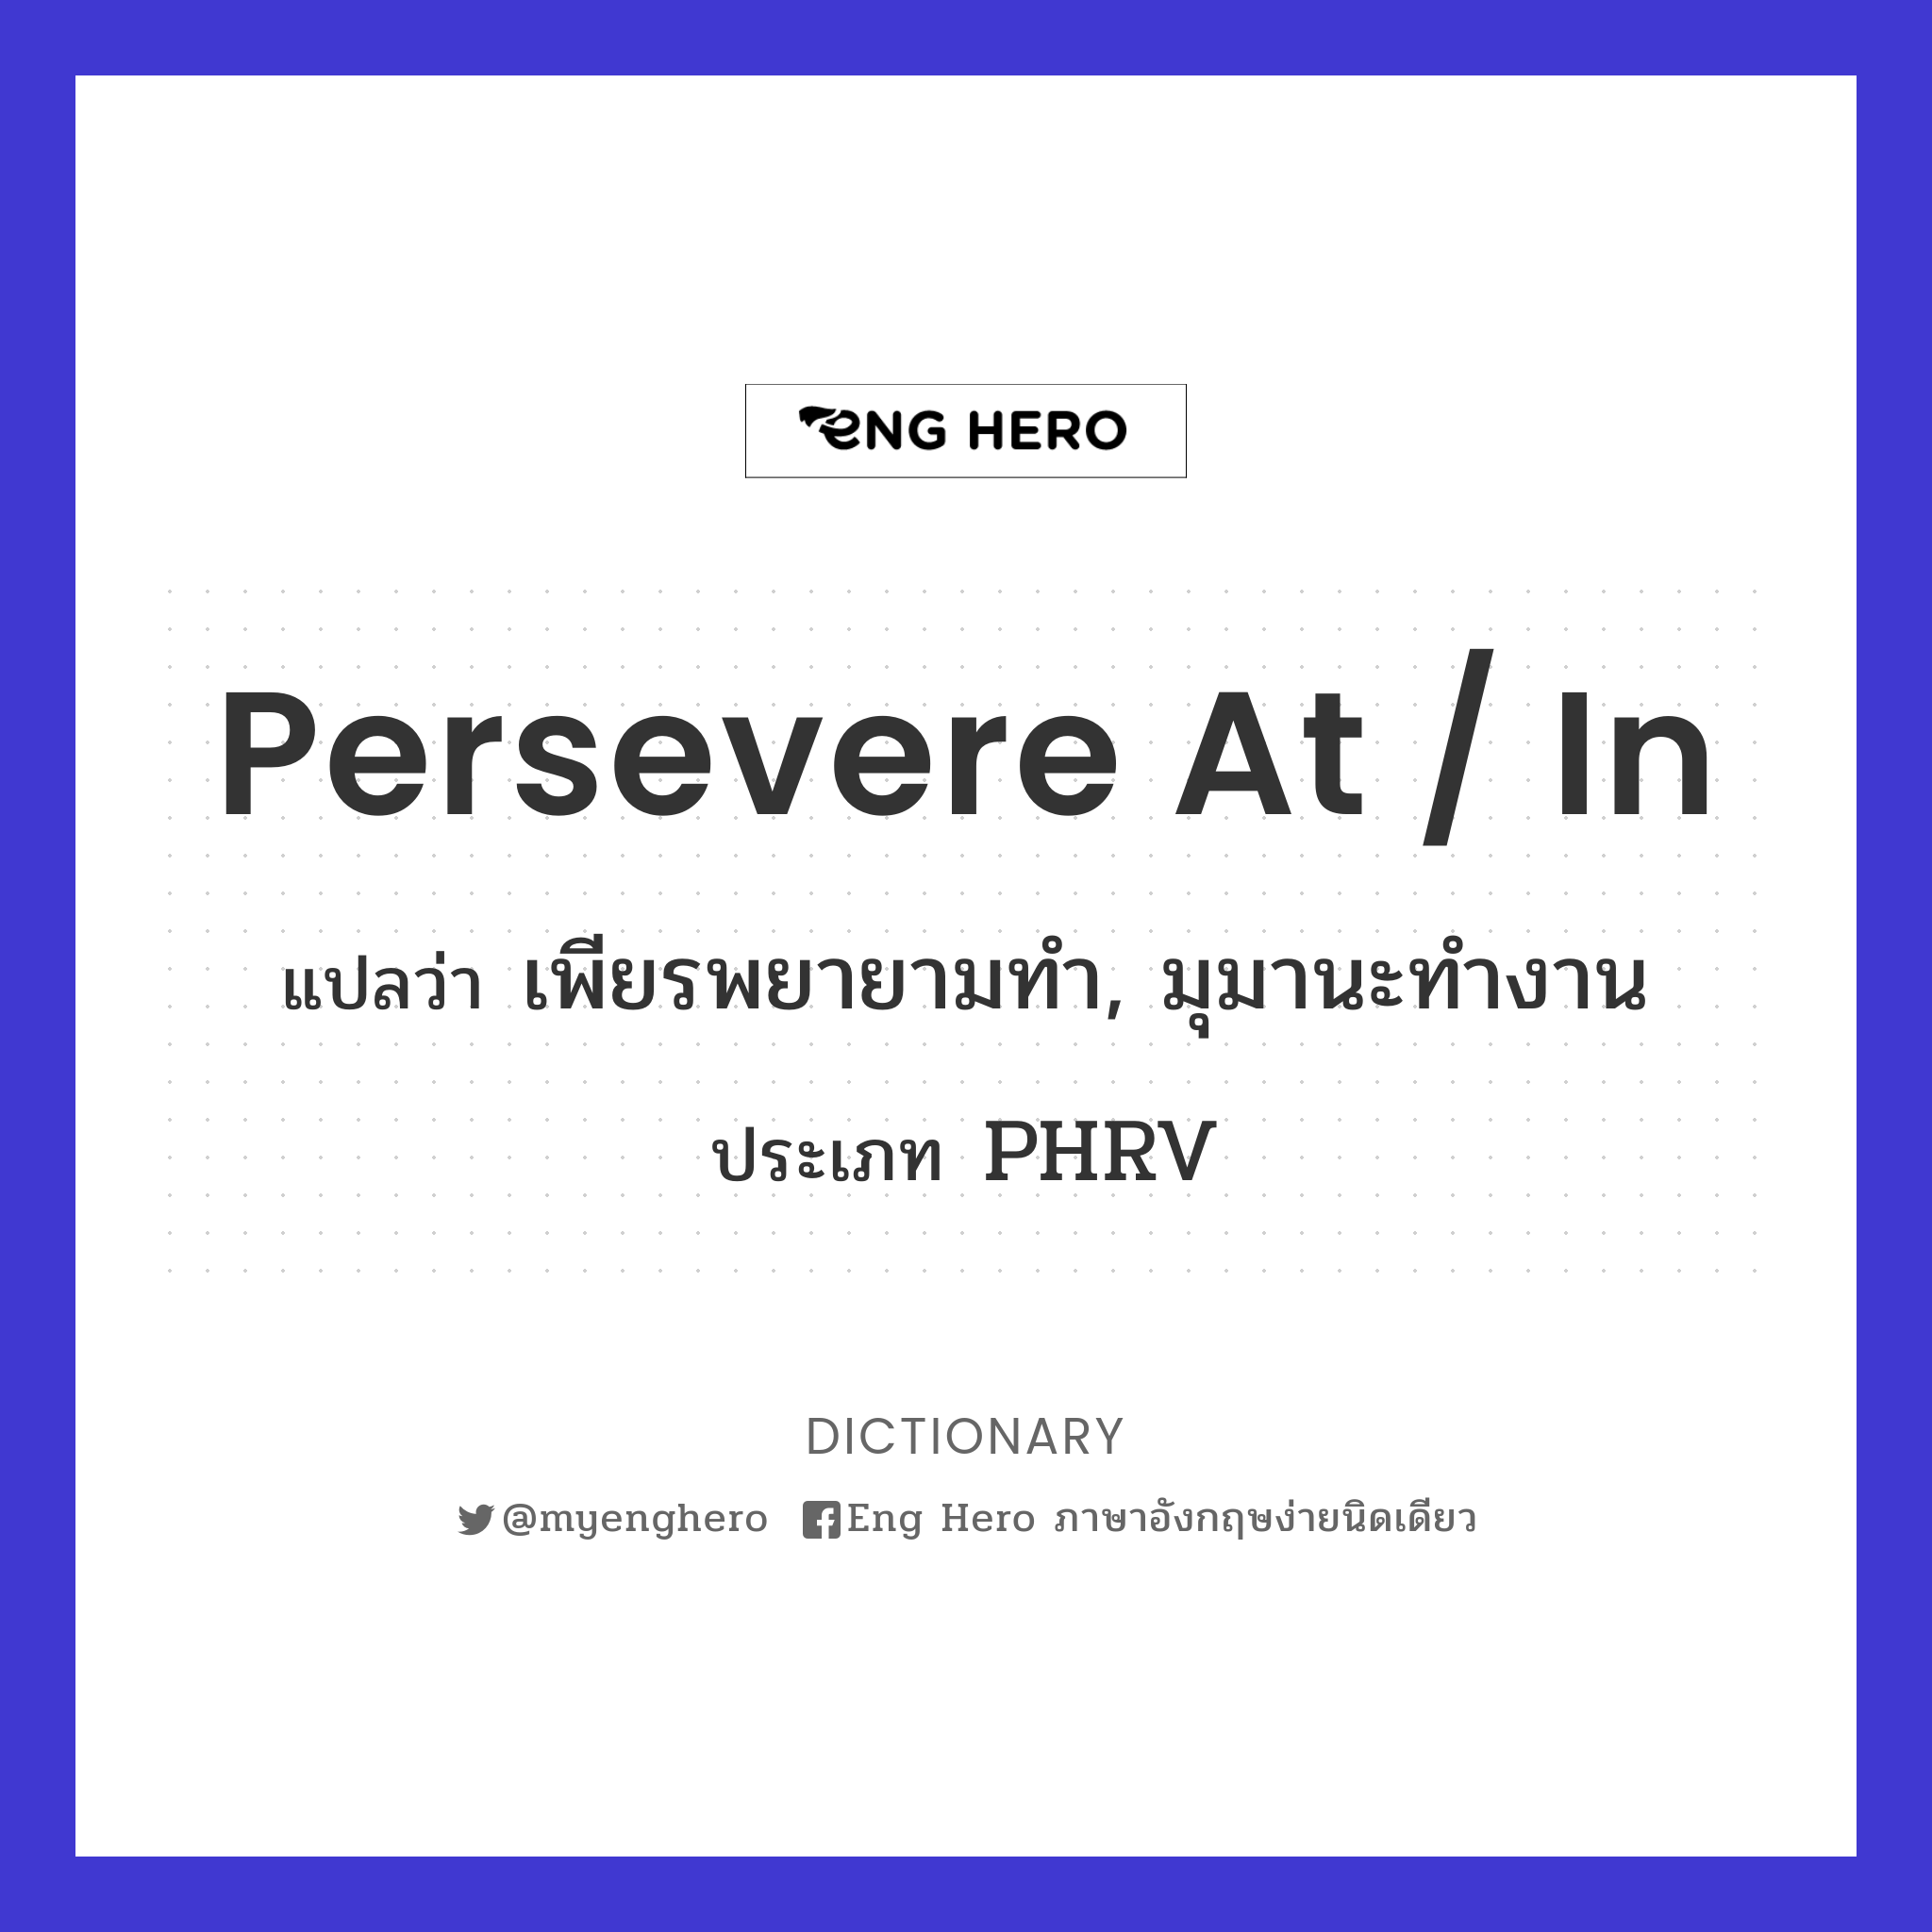 persevere at / in